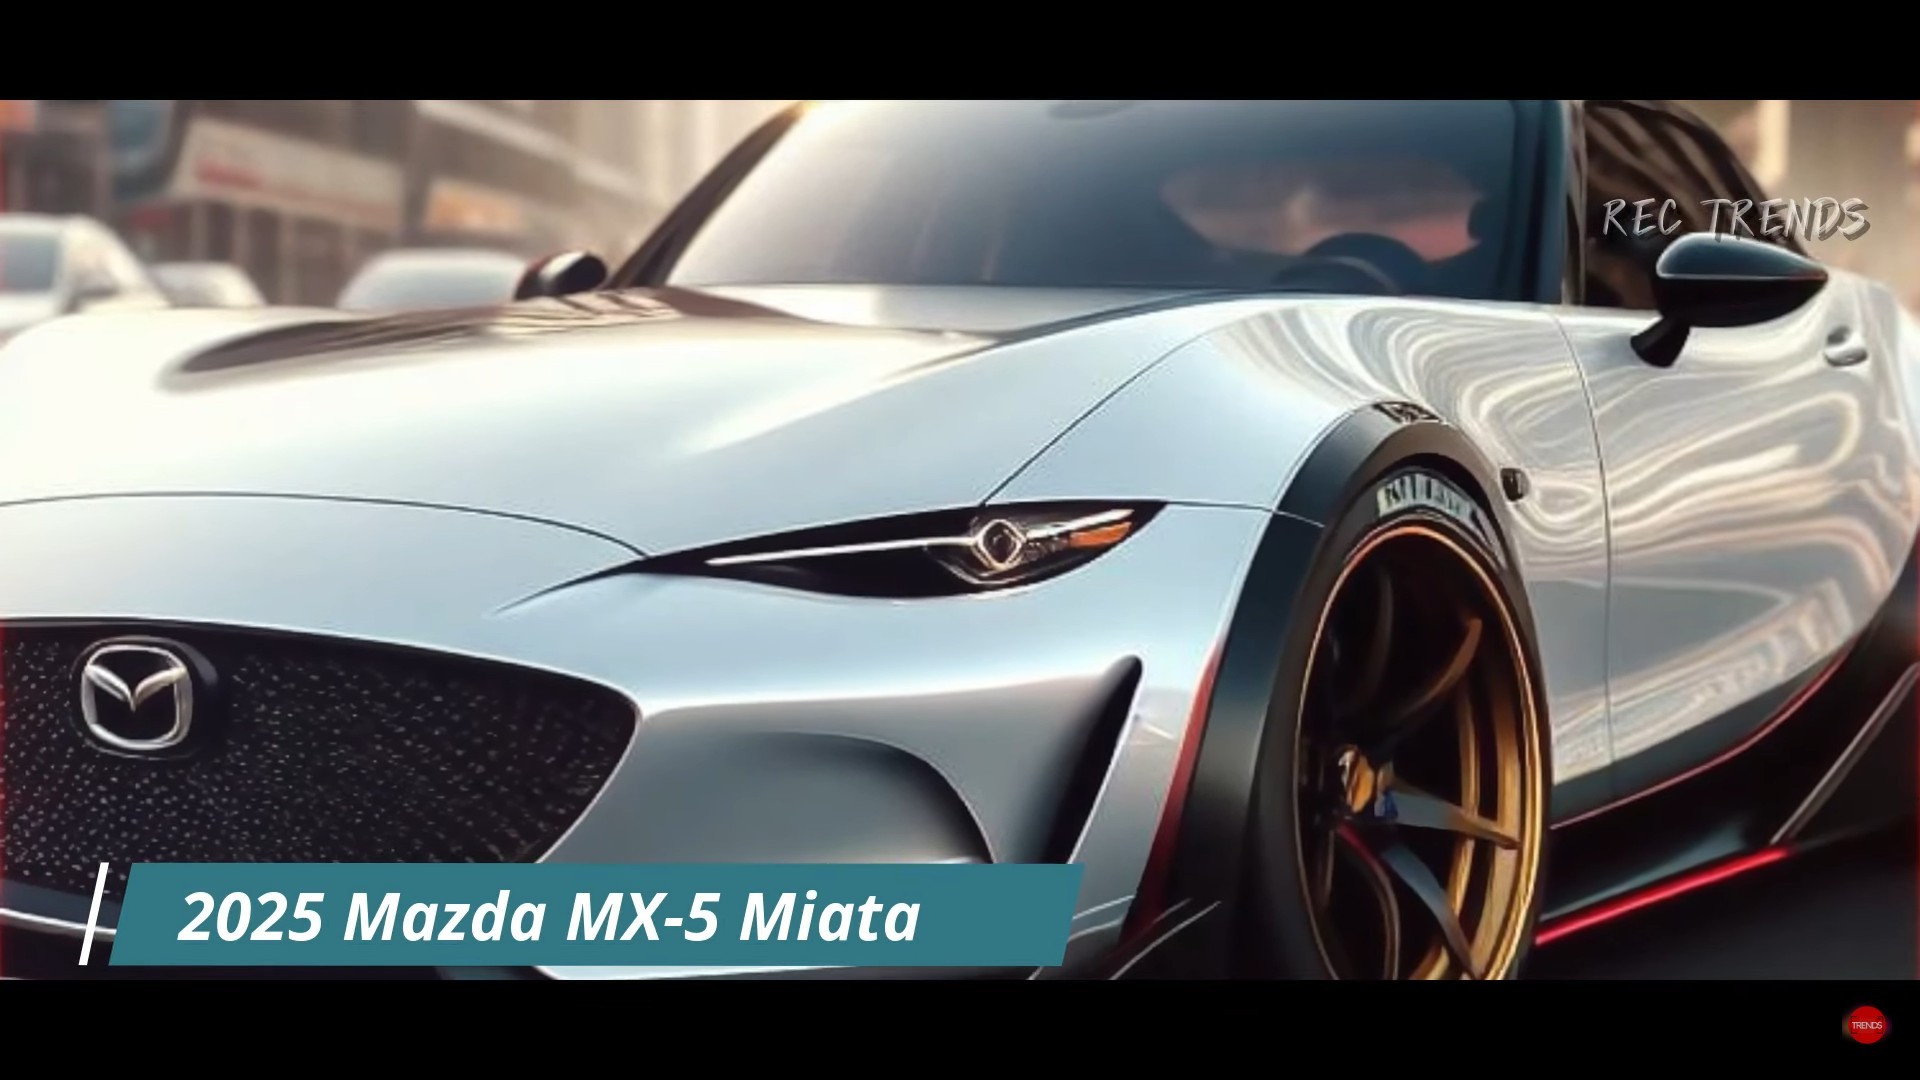 Everything You Need To Know About The 2025 Mazda MX-5